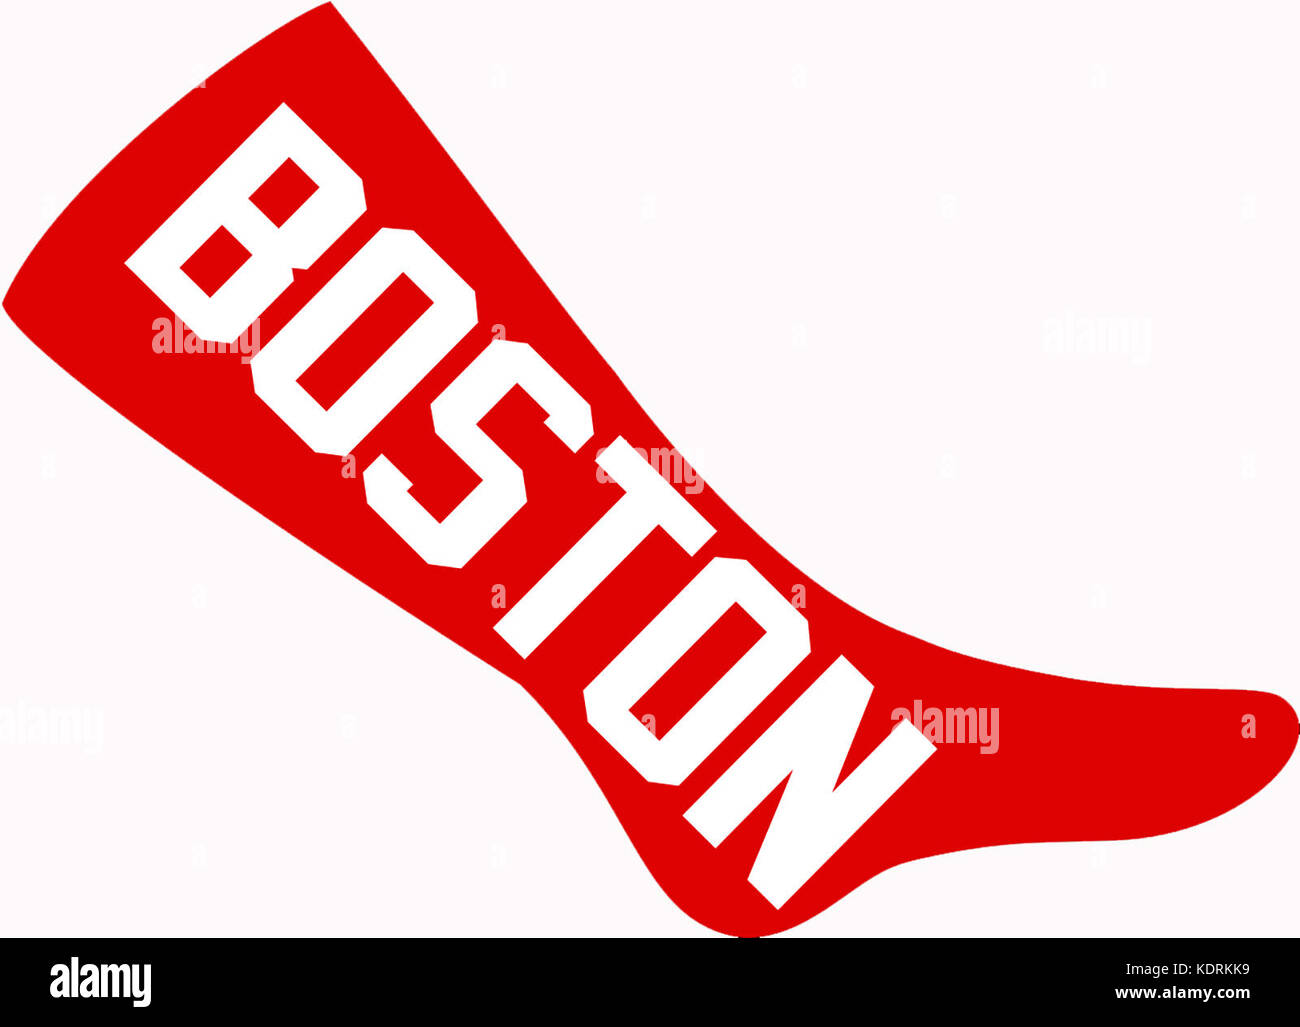 One of the first Boston Red Sox logos, circa 1908 Stock Photo